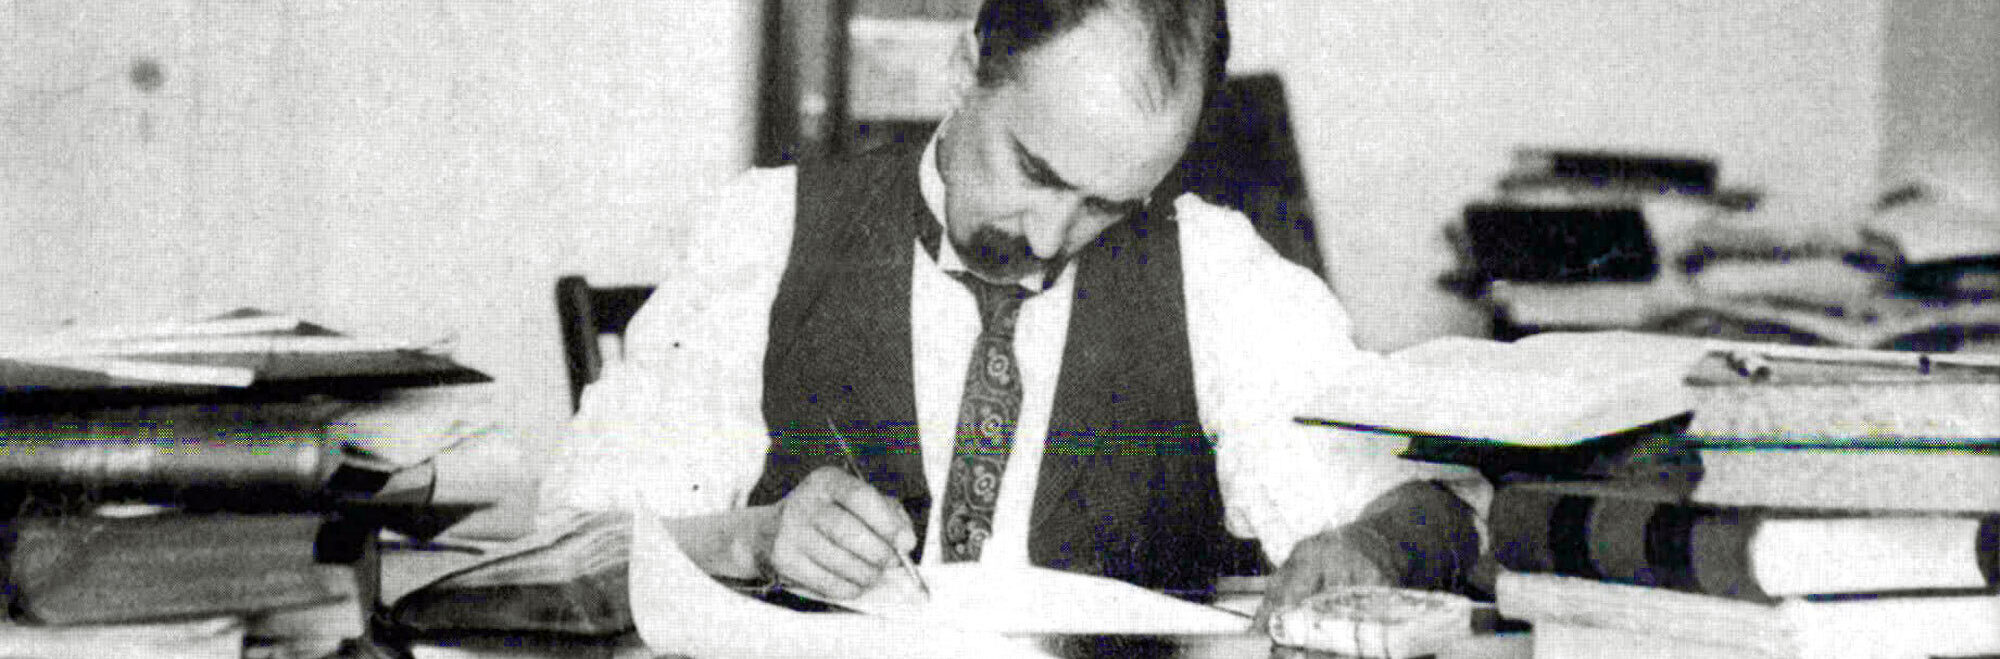 Sir William Osler at work (Johns Hopkins Archives)